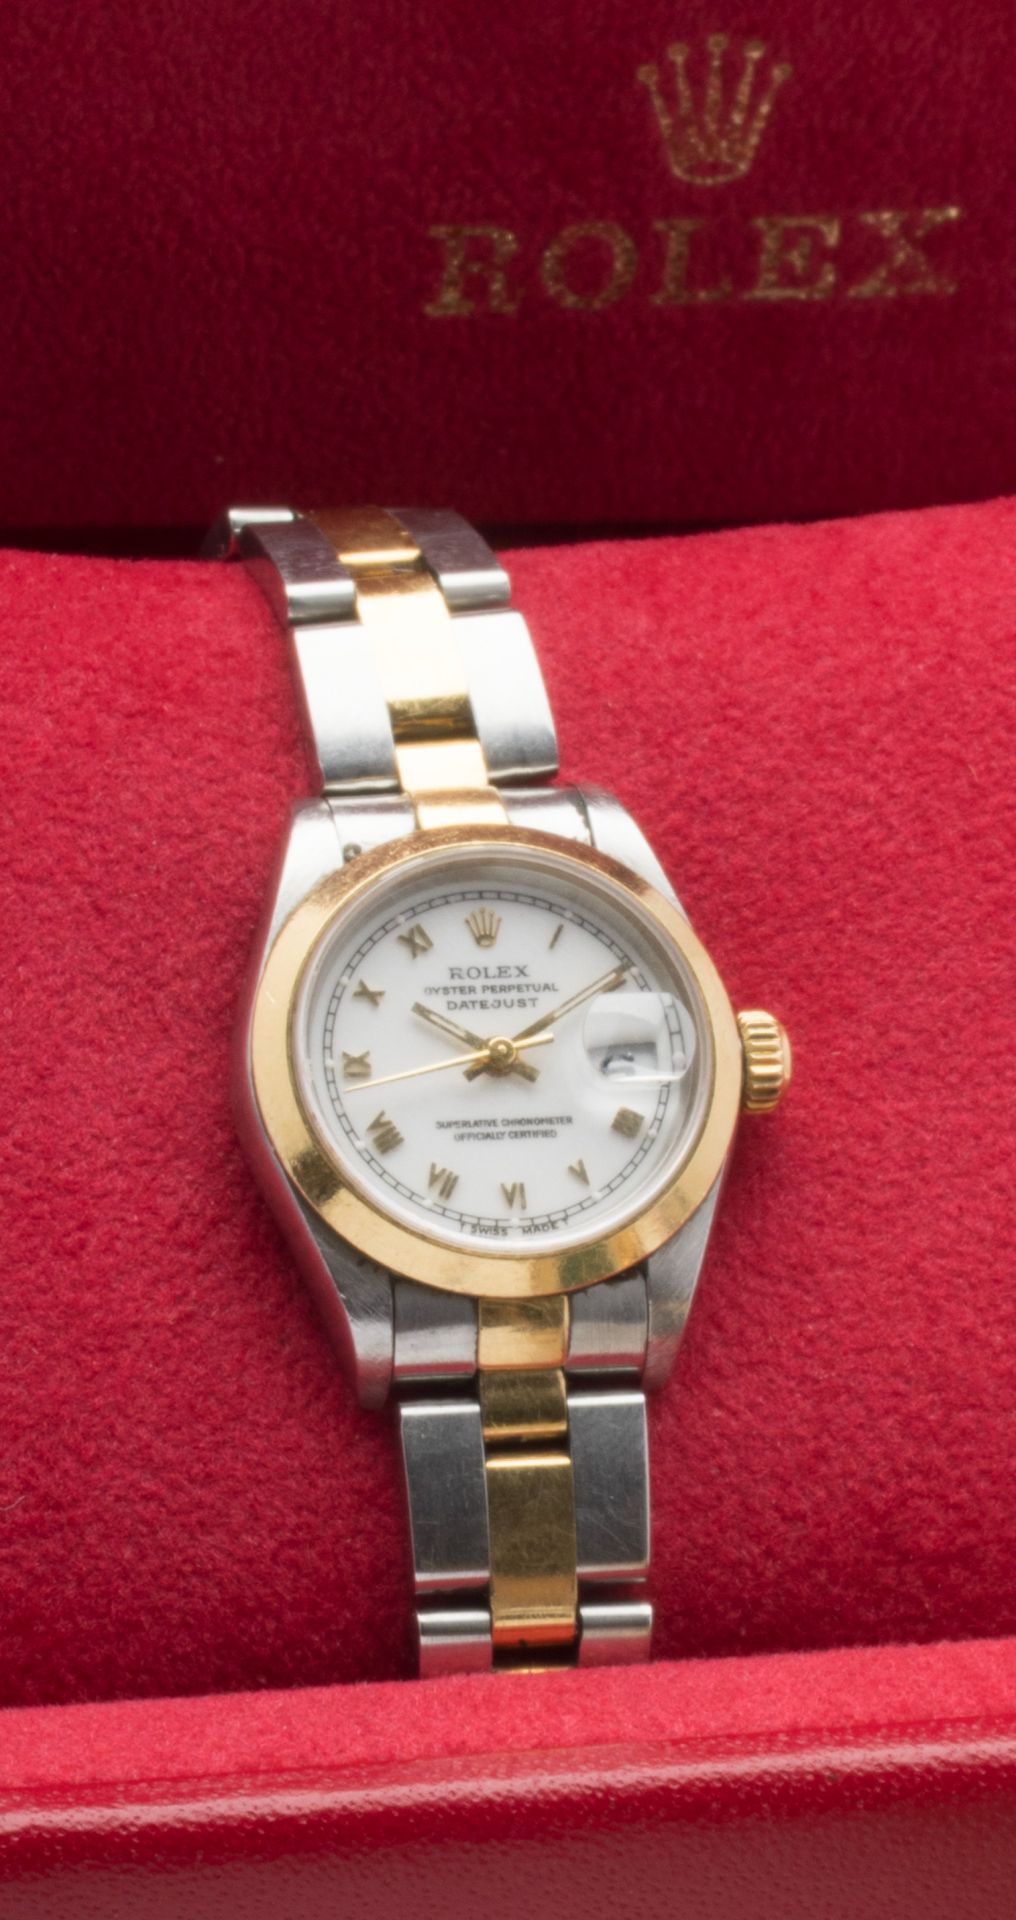 Null ROLEX LADY DATEJUST

Bracelet watch of woman out of gold 18K (750 thousandt&hellip;